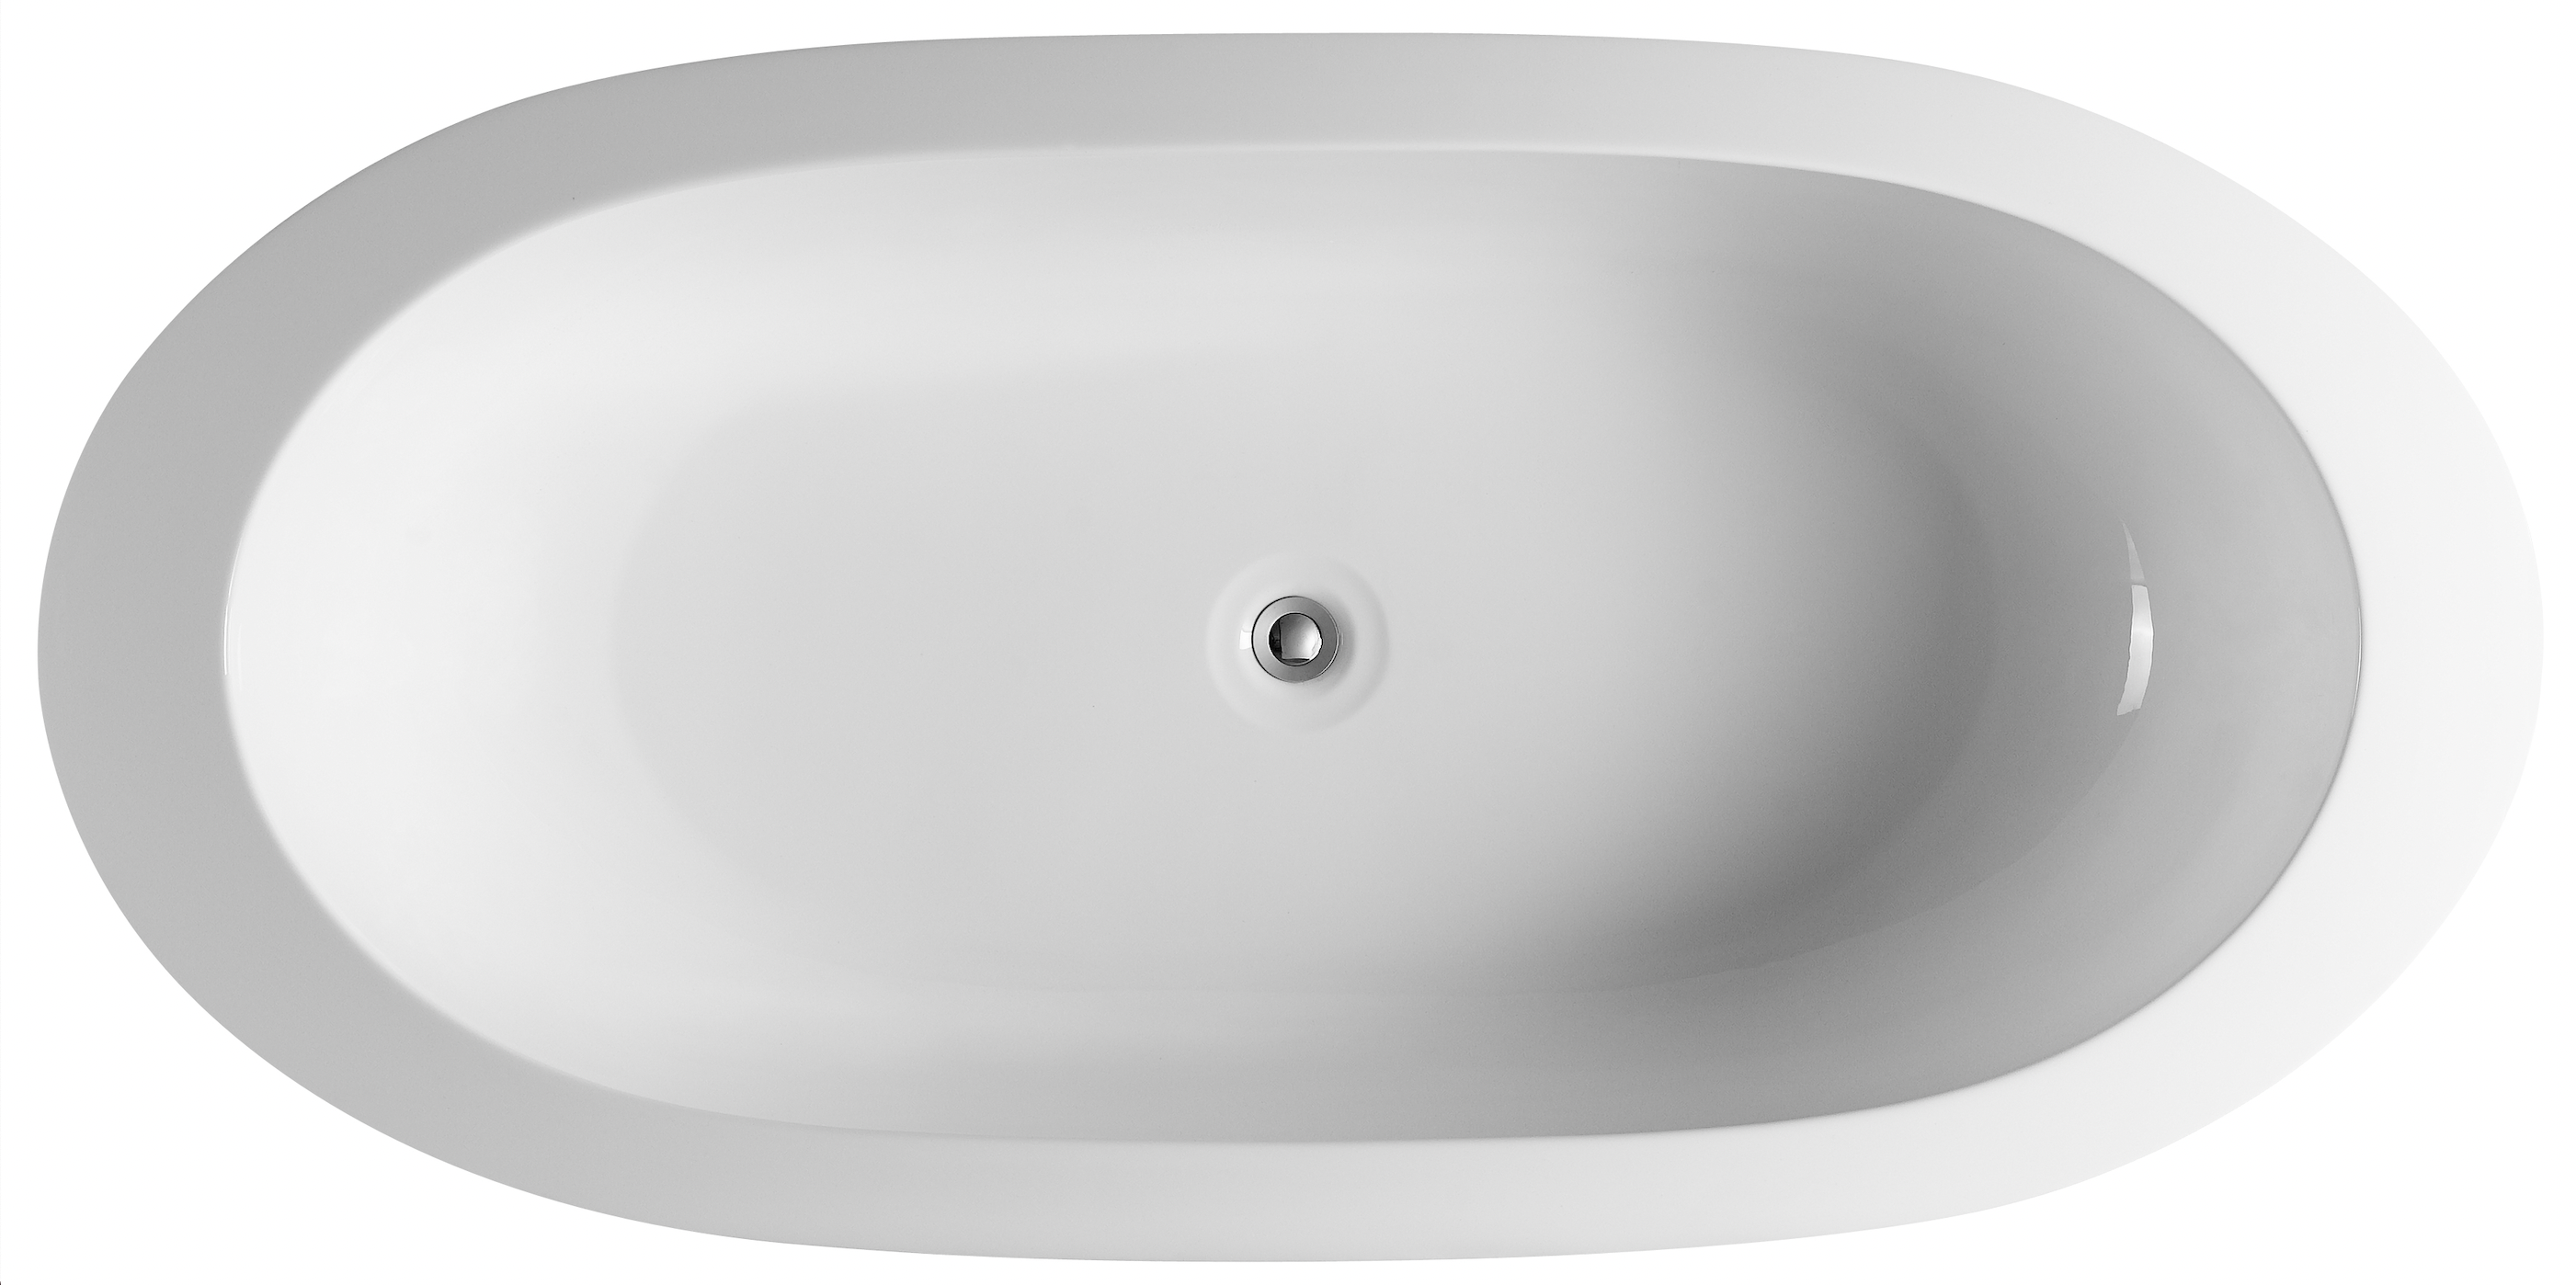 72" Acrylic Center Drain Oval Double Ended Flatbottom Freestanding Bathtub in Glossy White